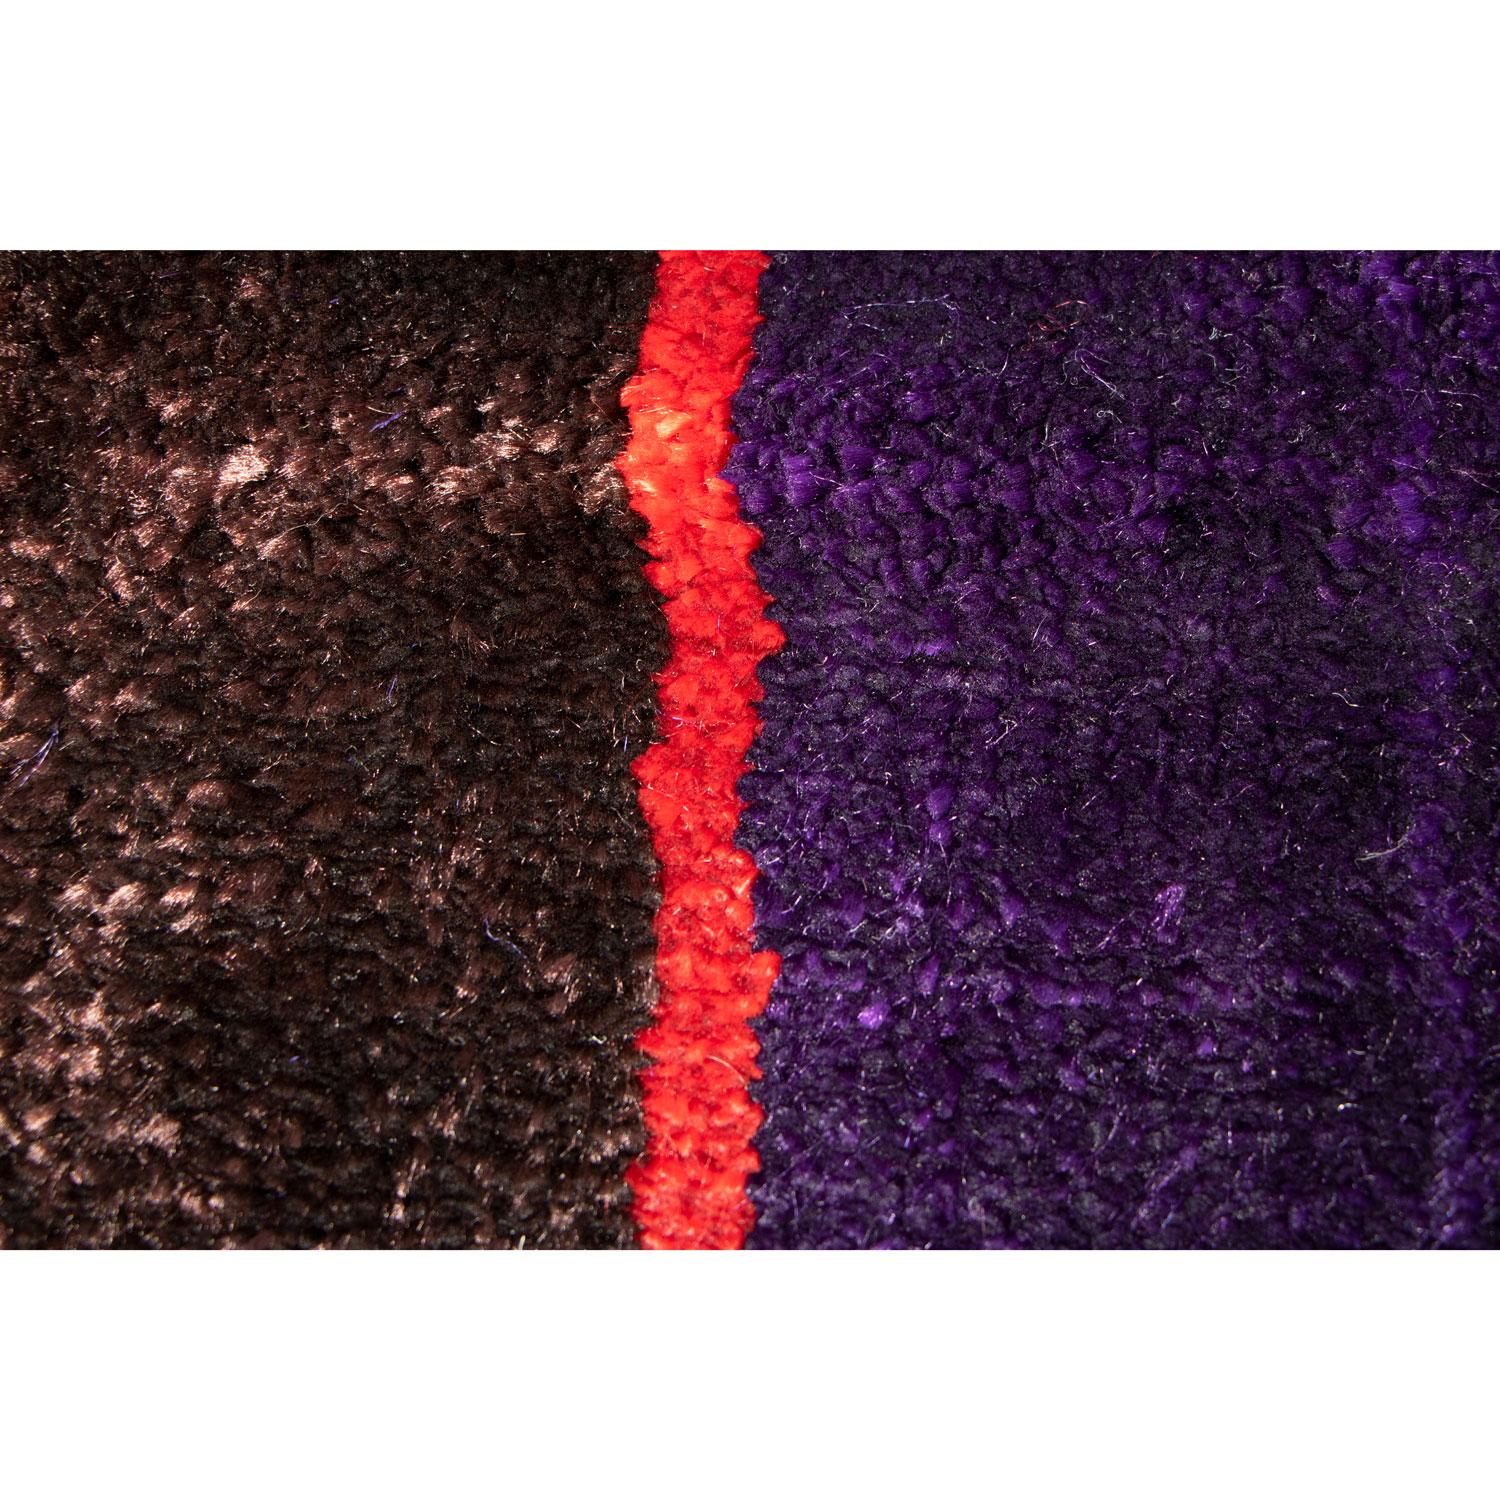 Modern 21st Cent Shiny Violet Brown Runner Rug by Deanna Comellini In Stock 60x200cm For Sale